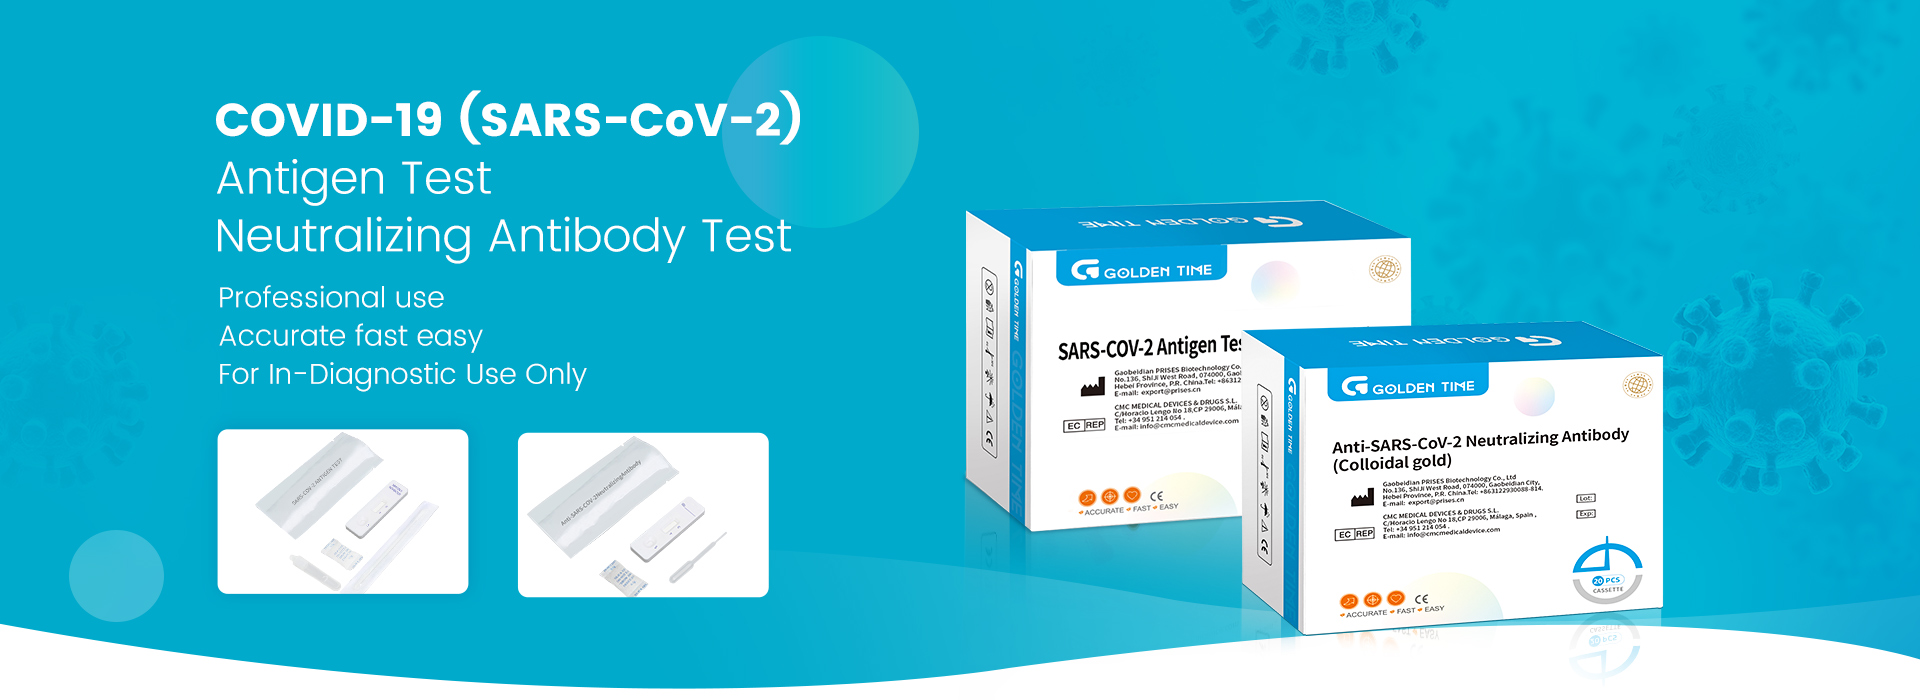 Golden Time COVID-19 antigen rapid test and neutralizing antibody test for professional use got a White List from just now